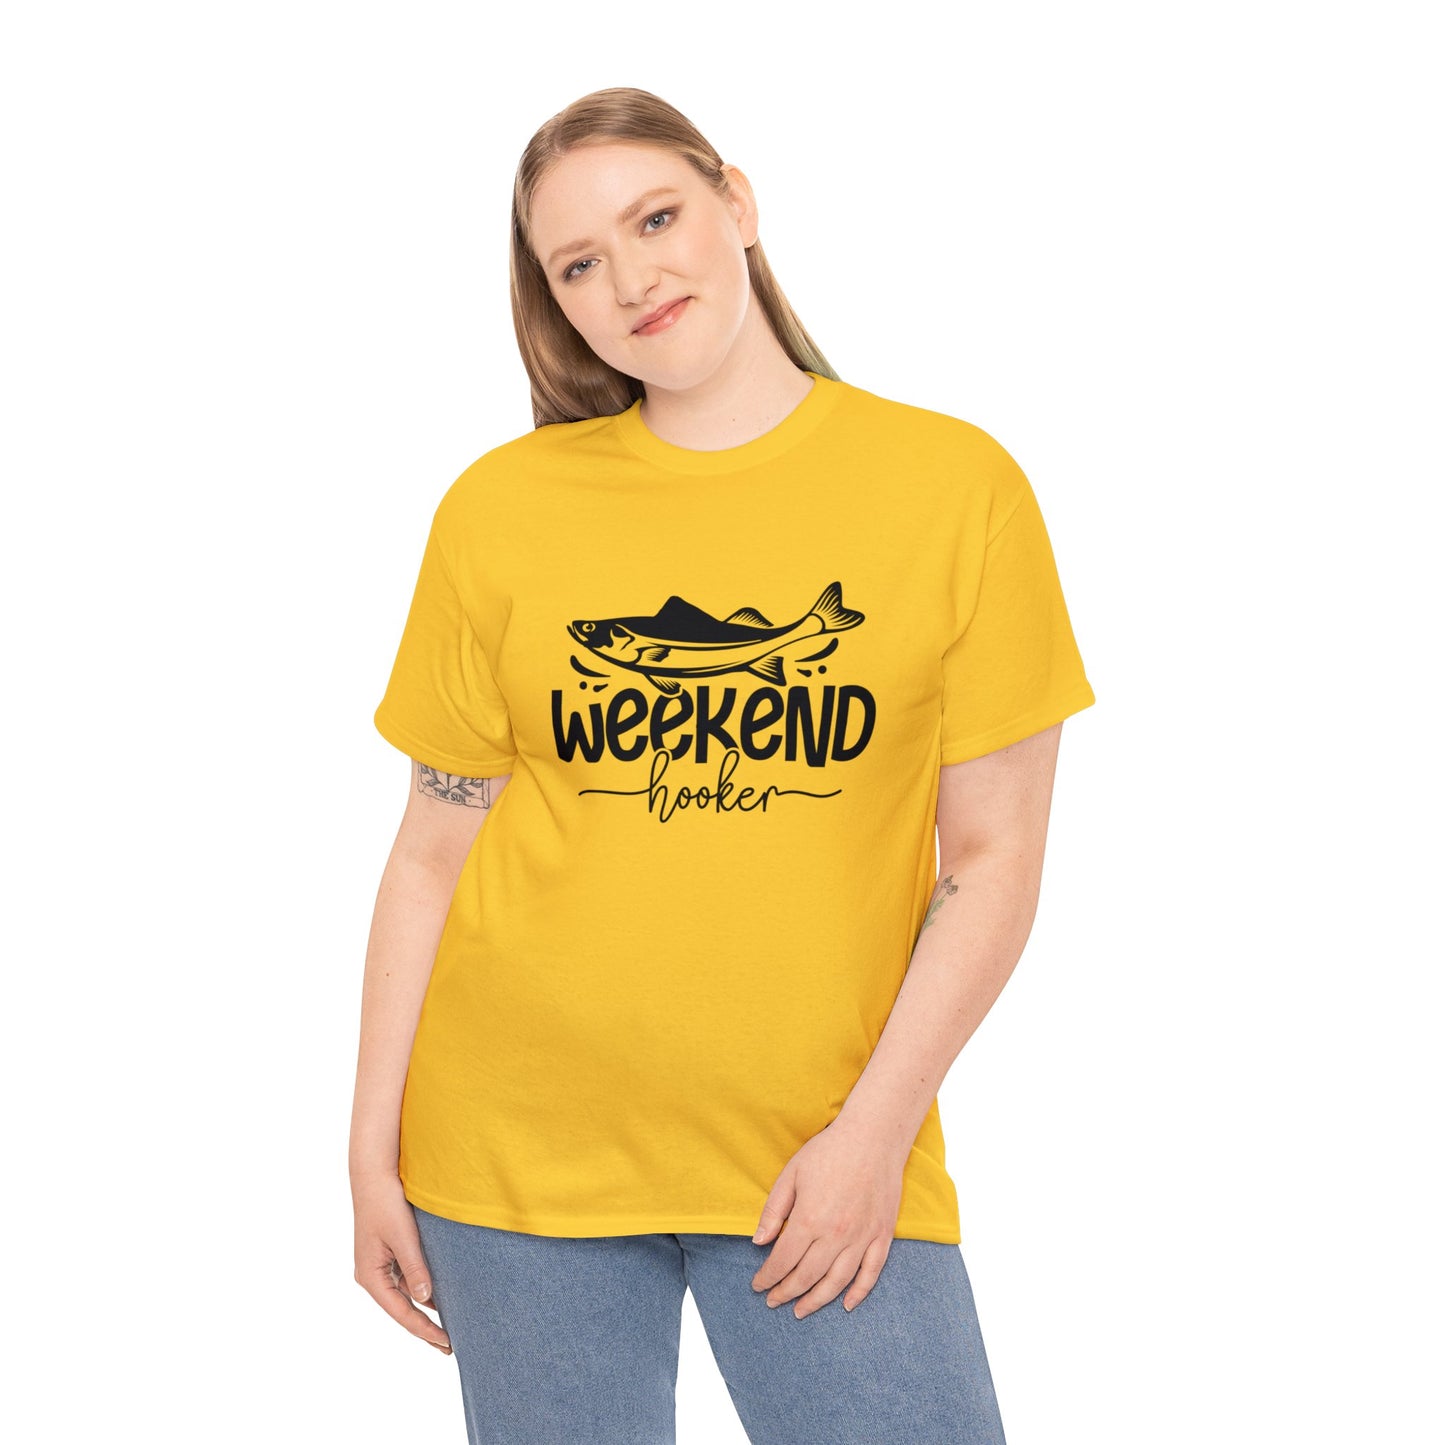 "Weekend Hooker" T-Shirt - Weave Got Gifts - Unique Gifts You Won’t Find Anywhere Else!